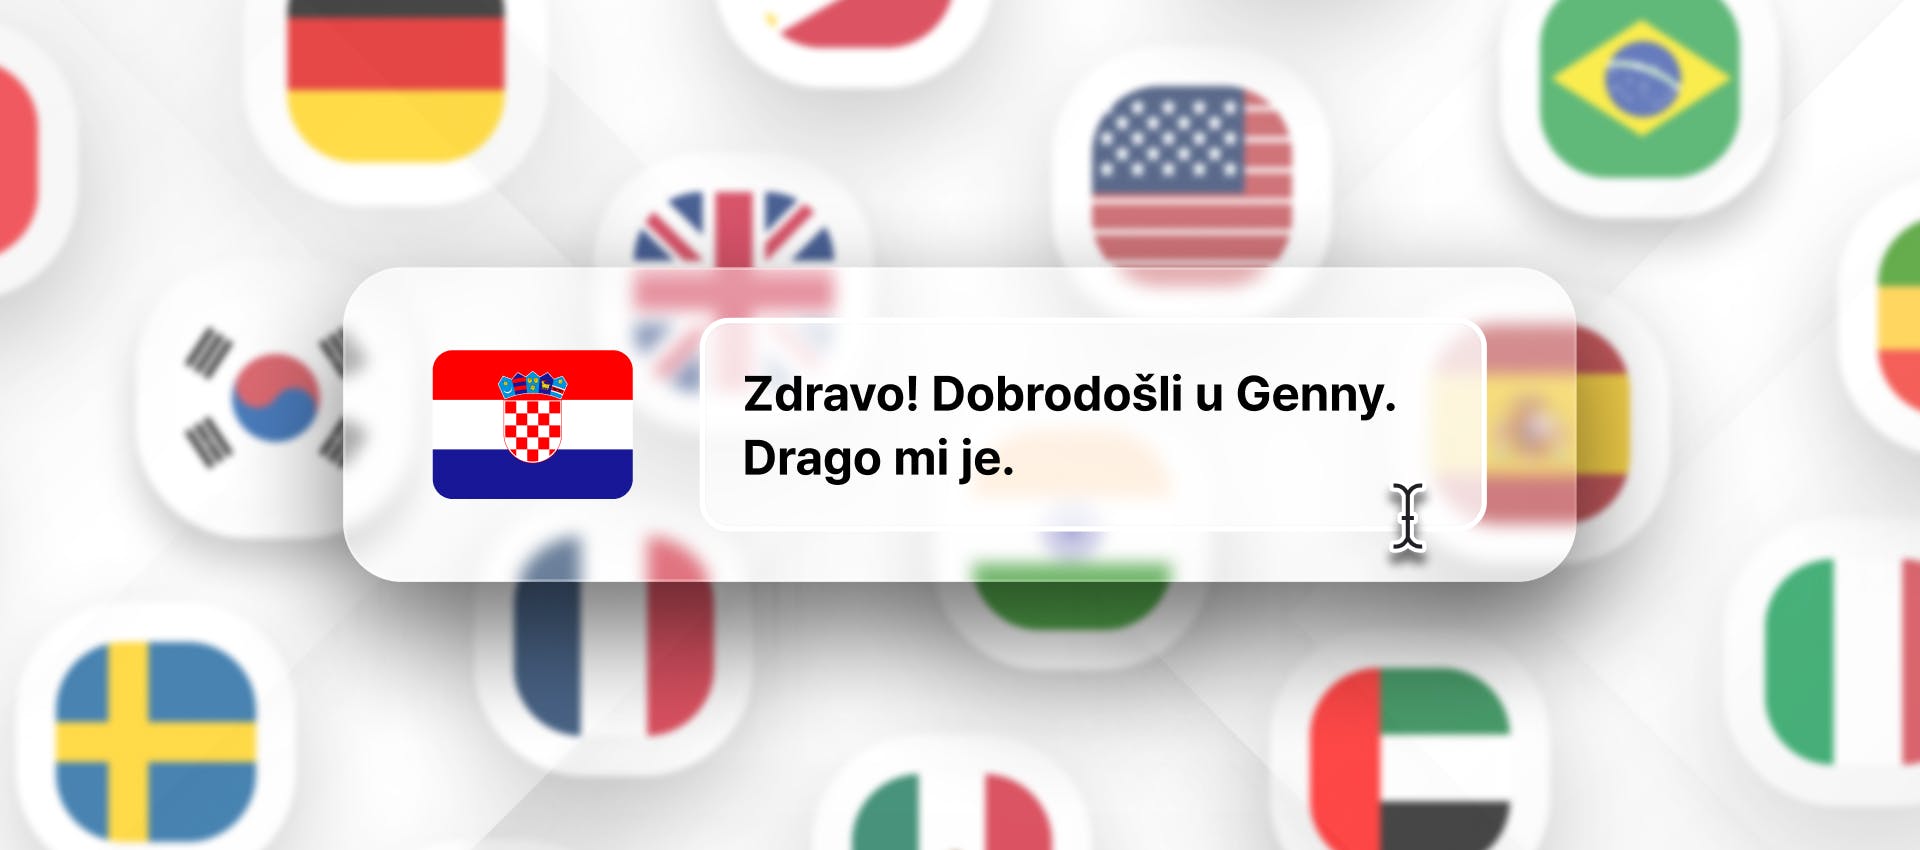 Croatian phrase for Croatian TTS generation with different flags in the background